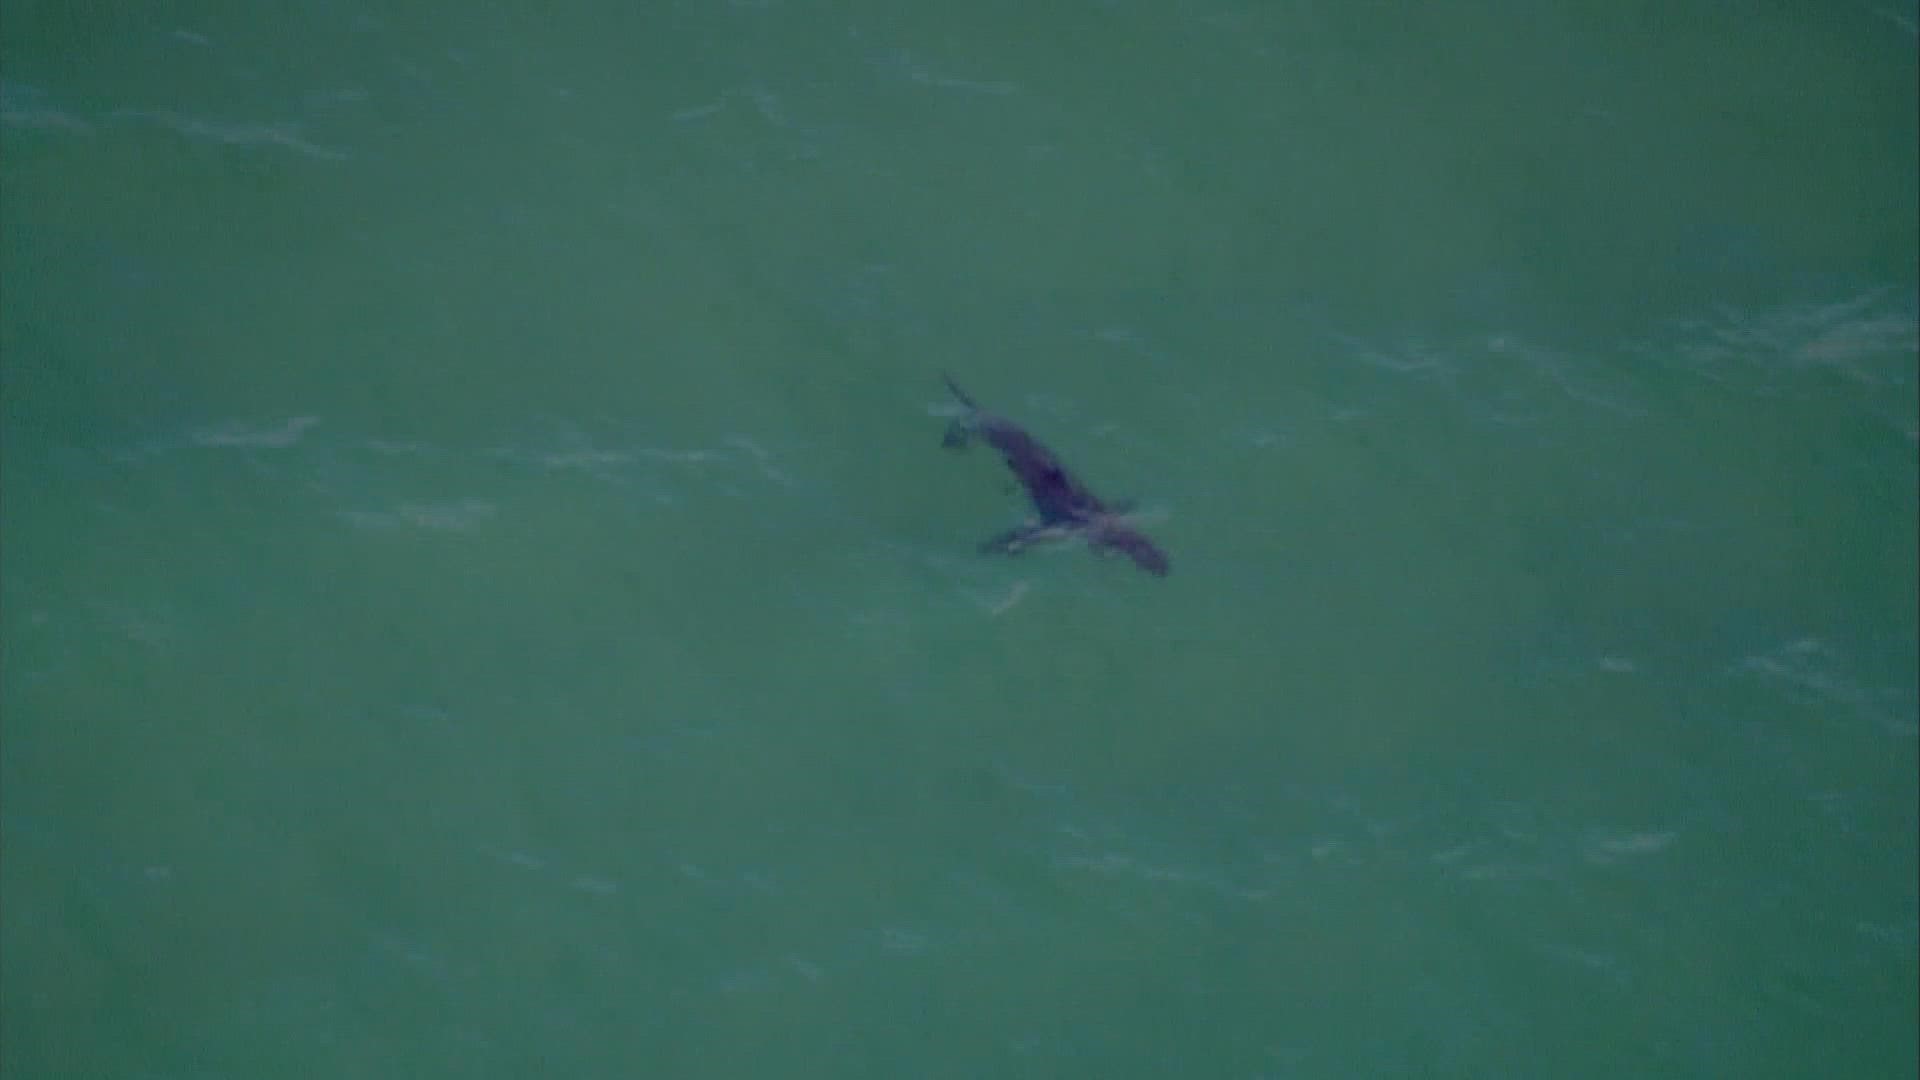 The sharks were seen swimming about 100 feet from the shoreline.